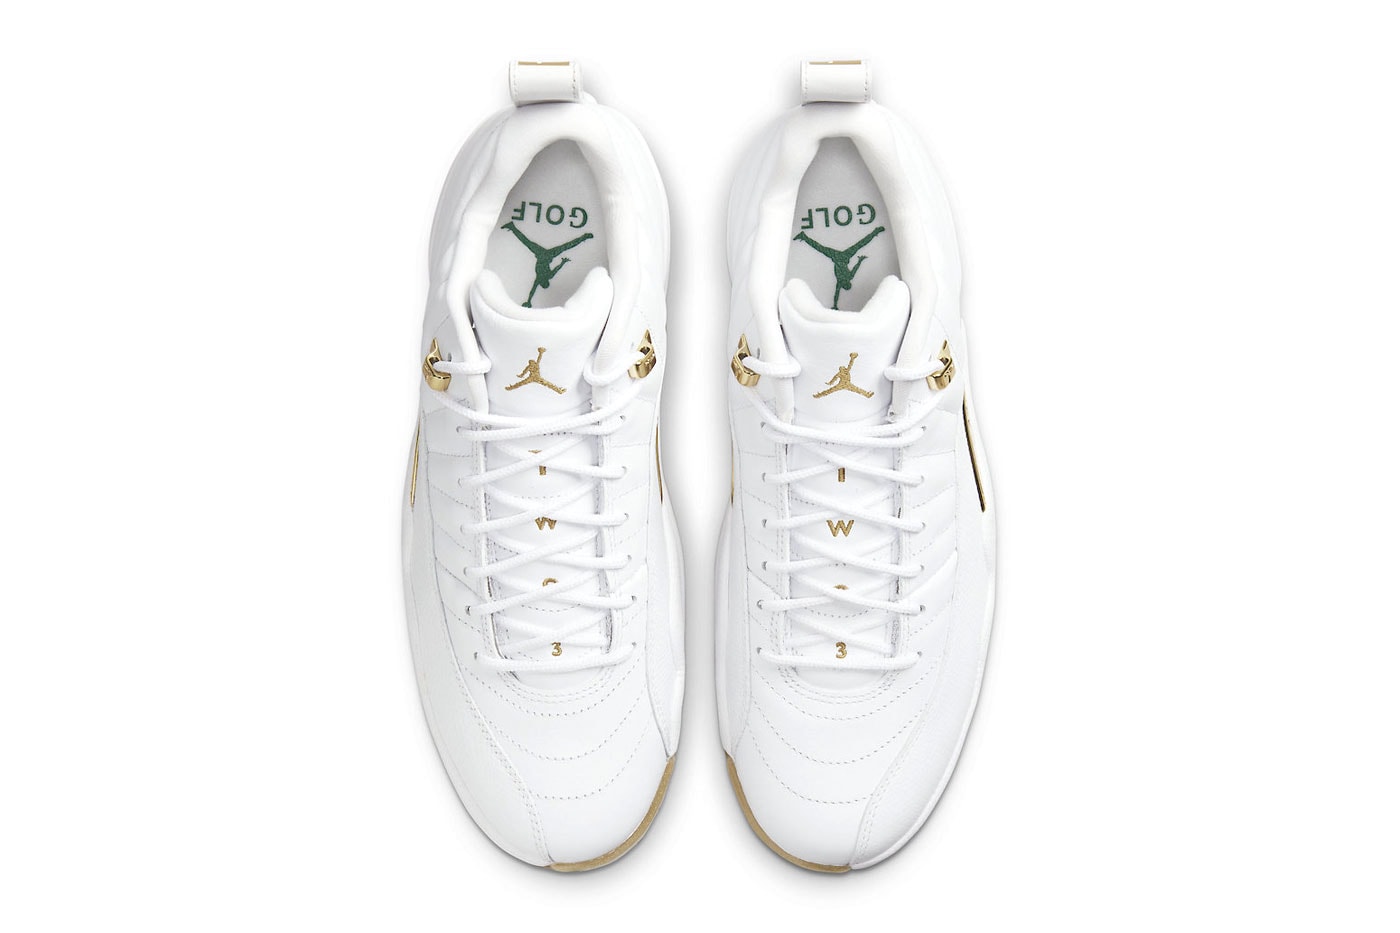 Air Jordan 12 Low Golf Masters Tournament Metallic Gold green soft spikes white leather gum release info date price